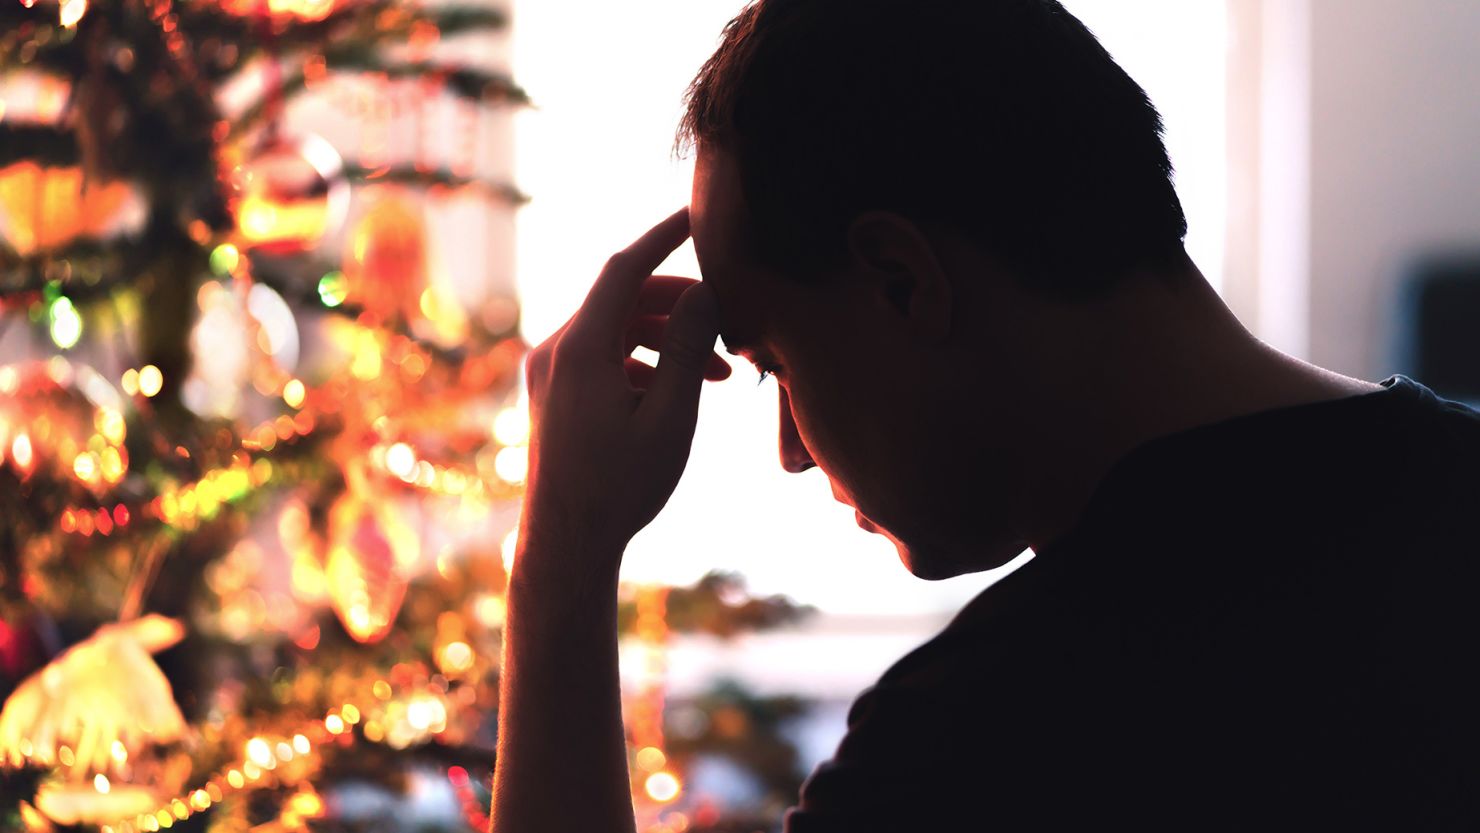 For some people, the holiday season can be a time of stress, emotional turmoil or intense loneliness. Remember that friends, colleagues and strangers may be having difficulties.